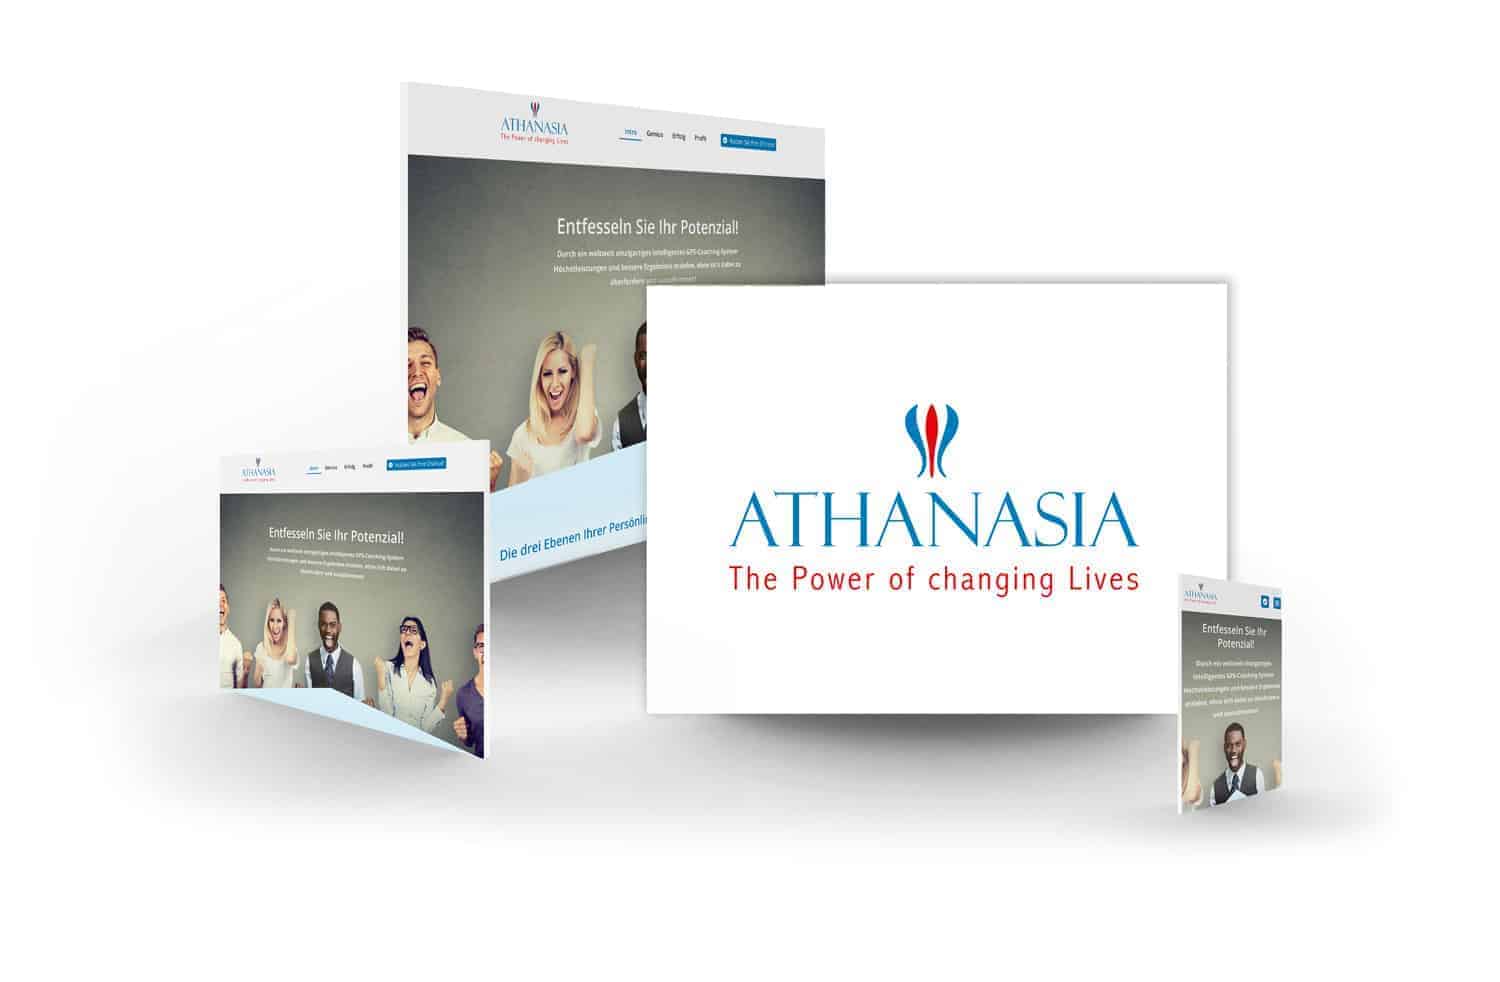 Referenz in Kornwestheim - Athanasia - The Power of changing Lives